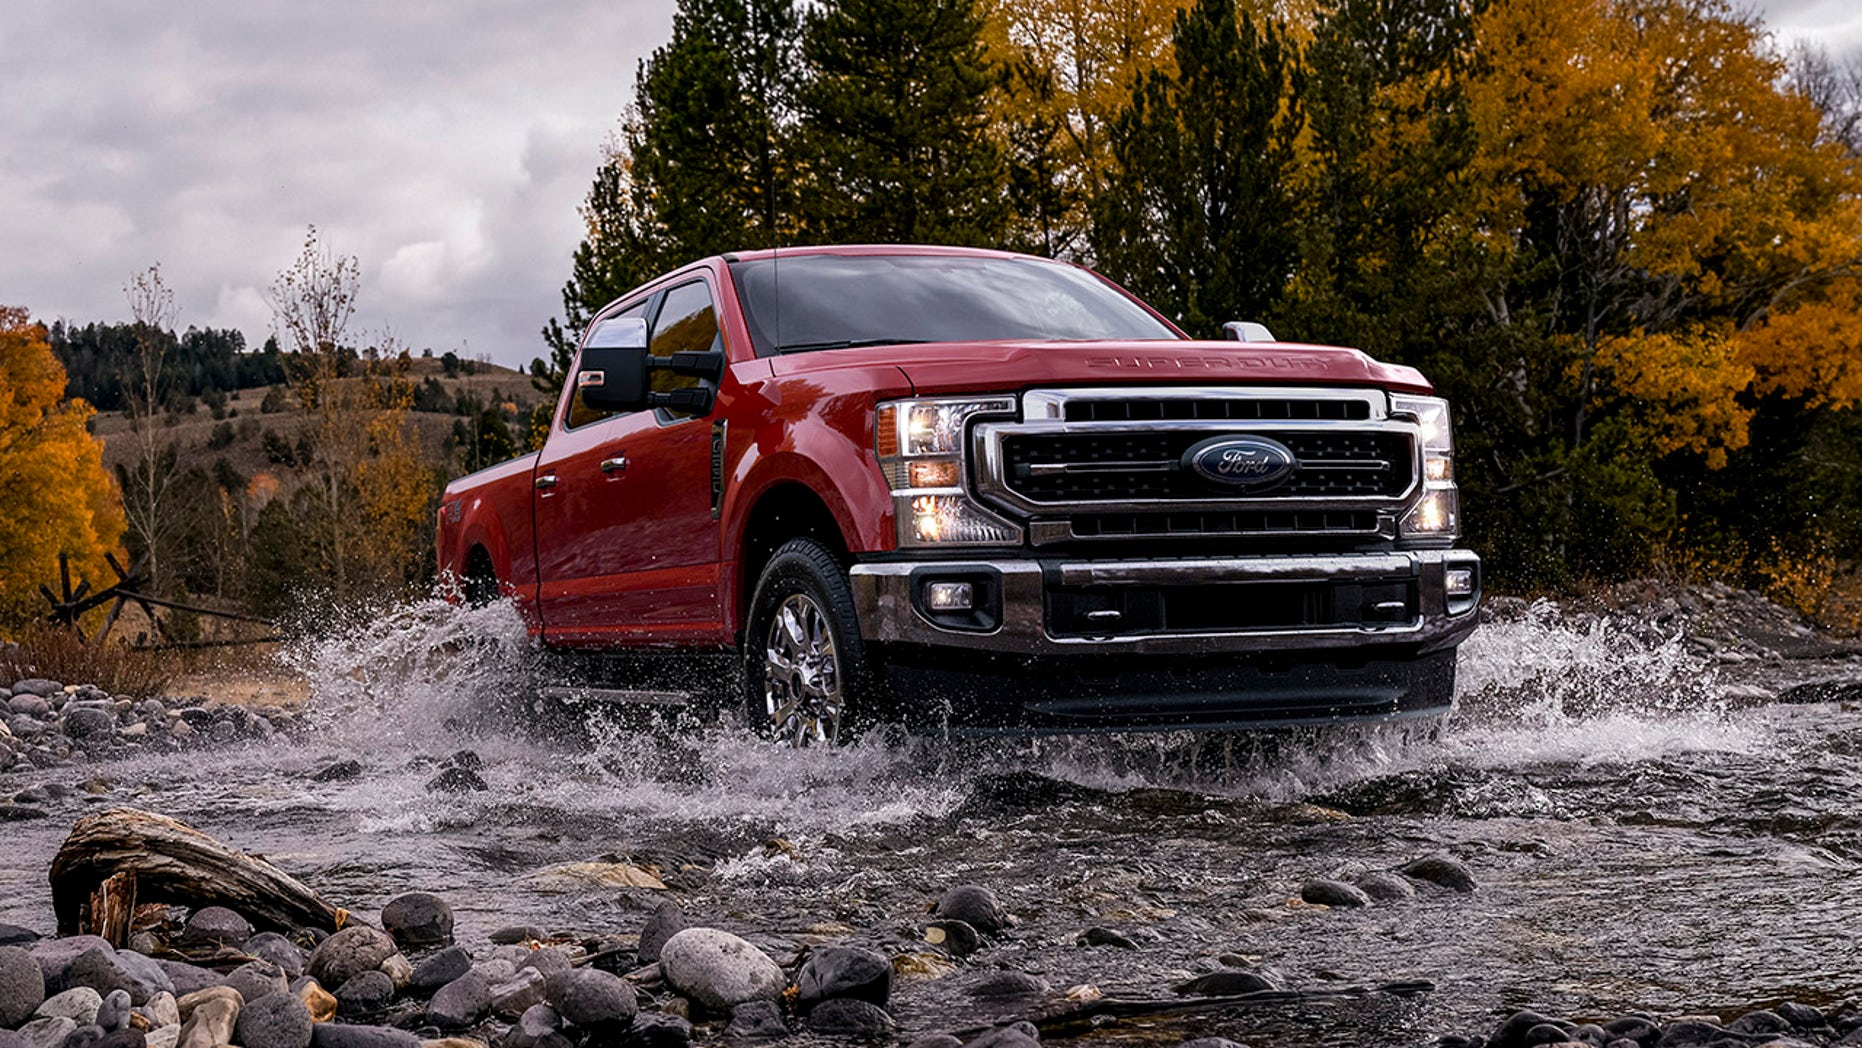 2020 Ford F-Series Super Duty debuts new 7.3-liter V8